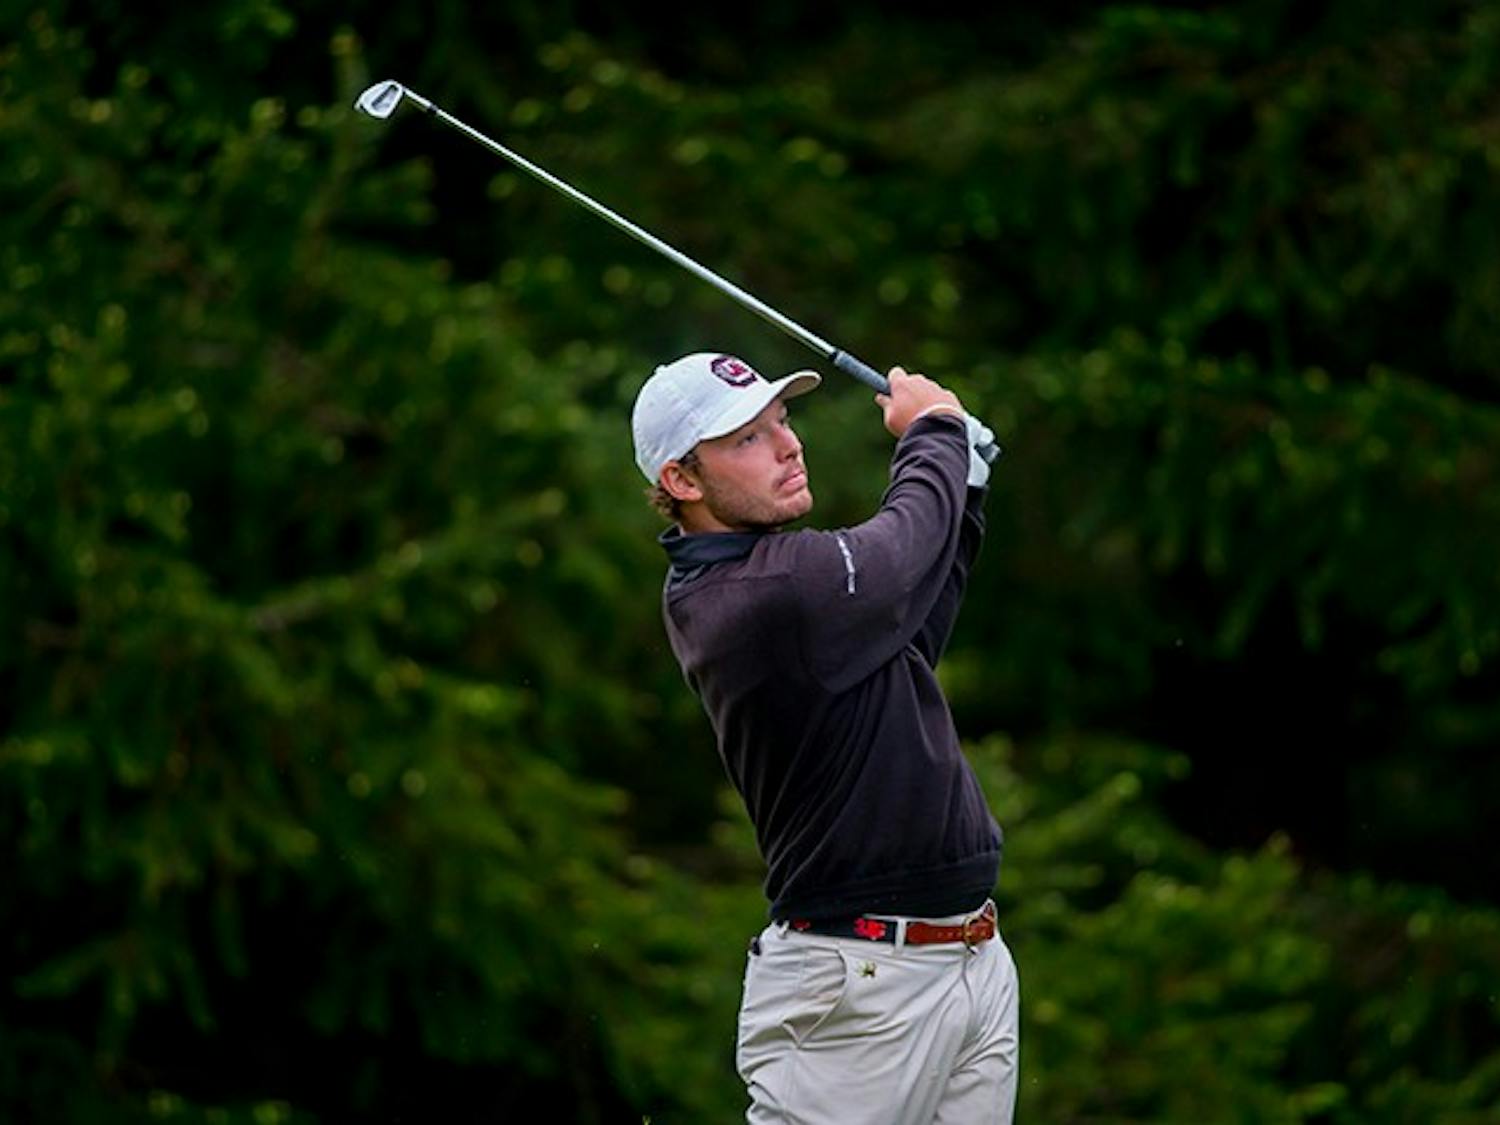 The third round of the NCAA regional men's golf tournament at Gold Mountain Golf Club in Bremerton, Wash. on Saturday May 16, 2015. (Photography by Scott Eklund/Red Box Pictures)